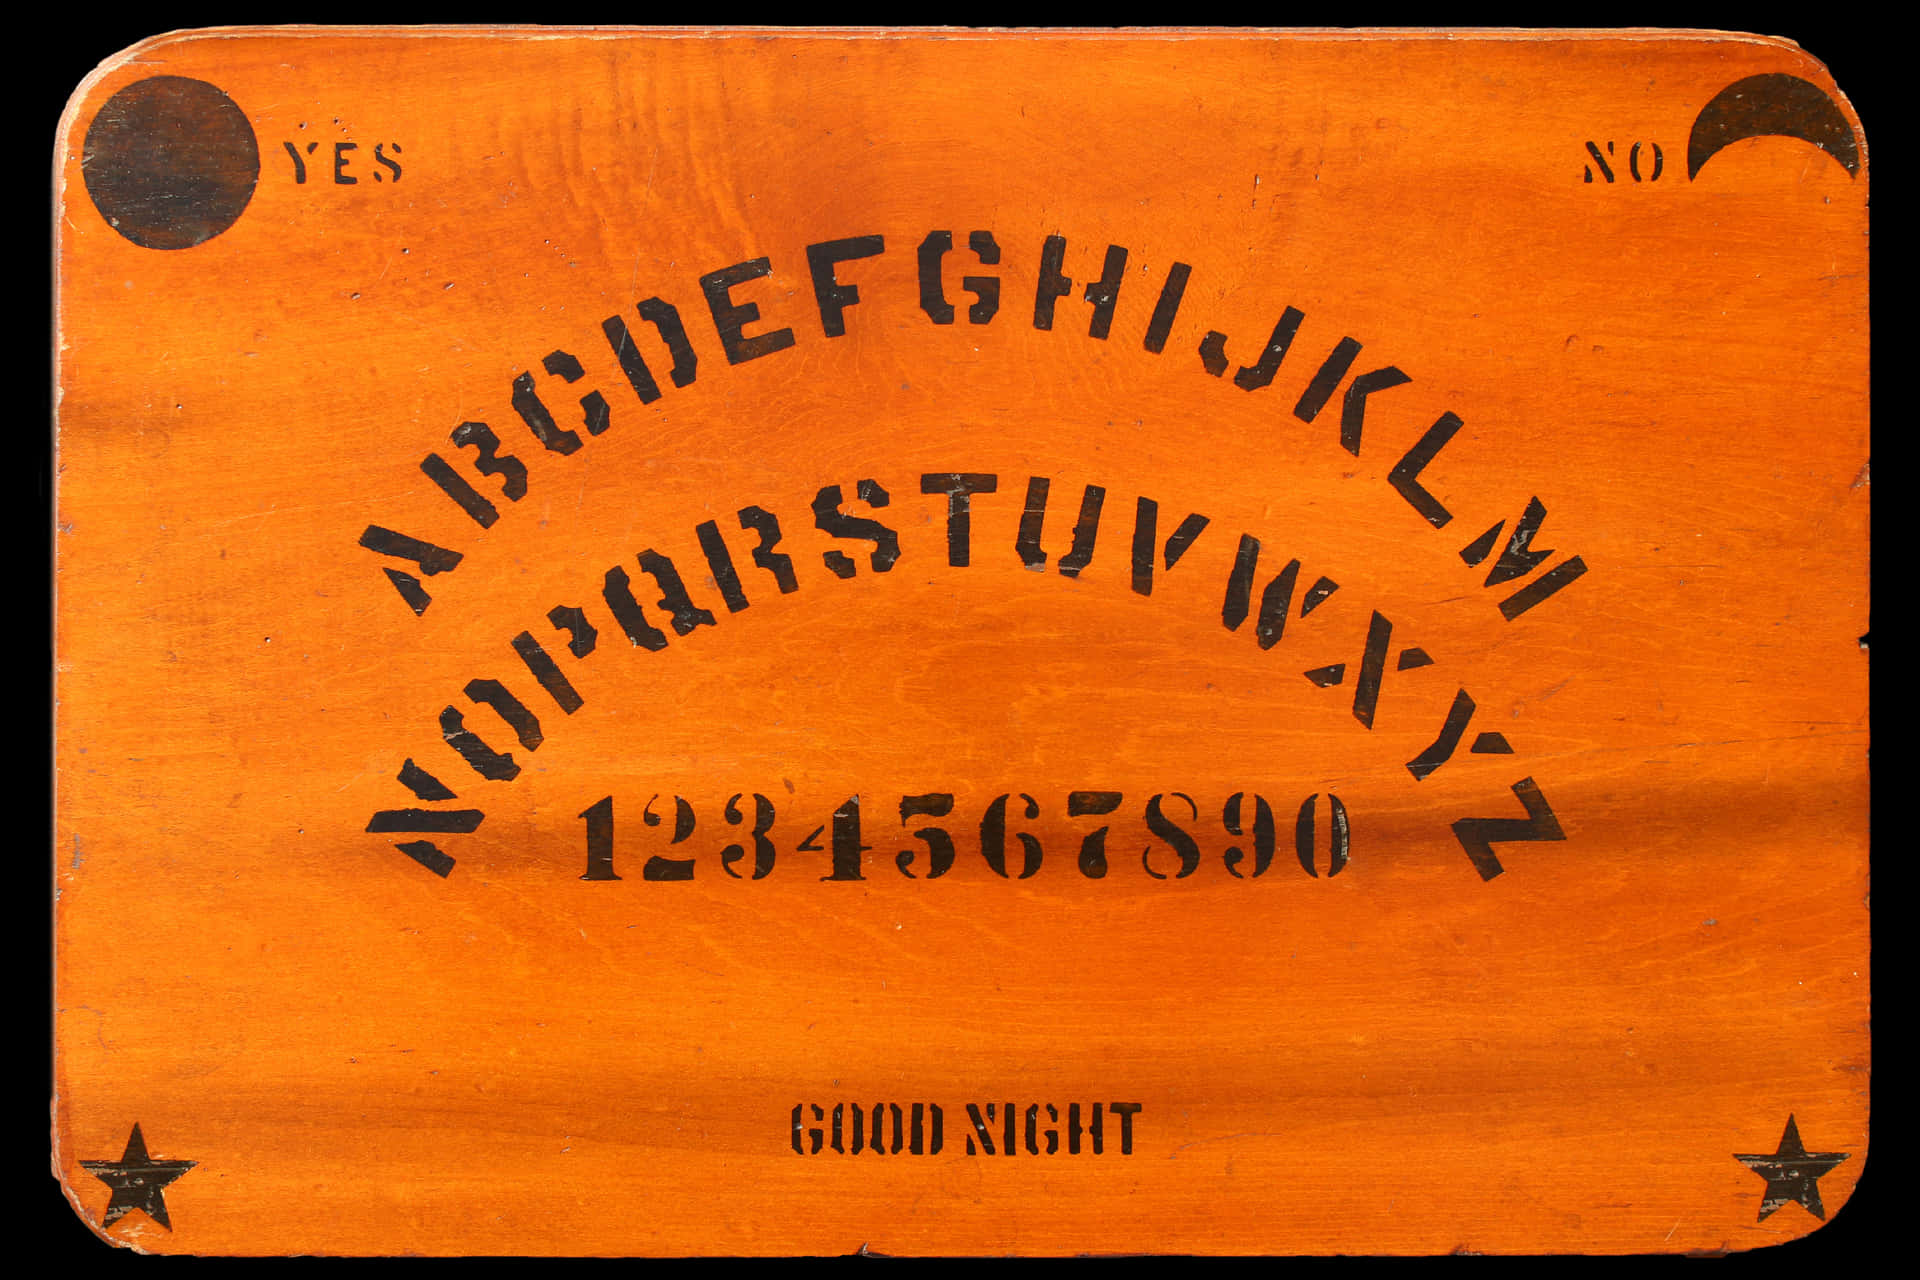 Dare to ask your questions with an Ouija board?